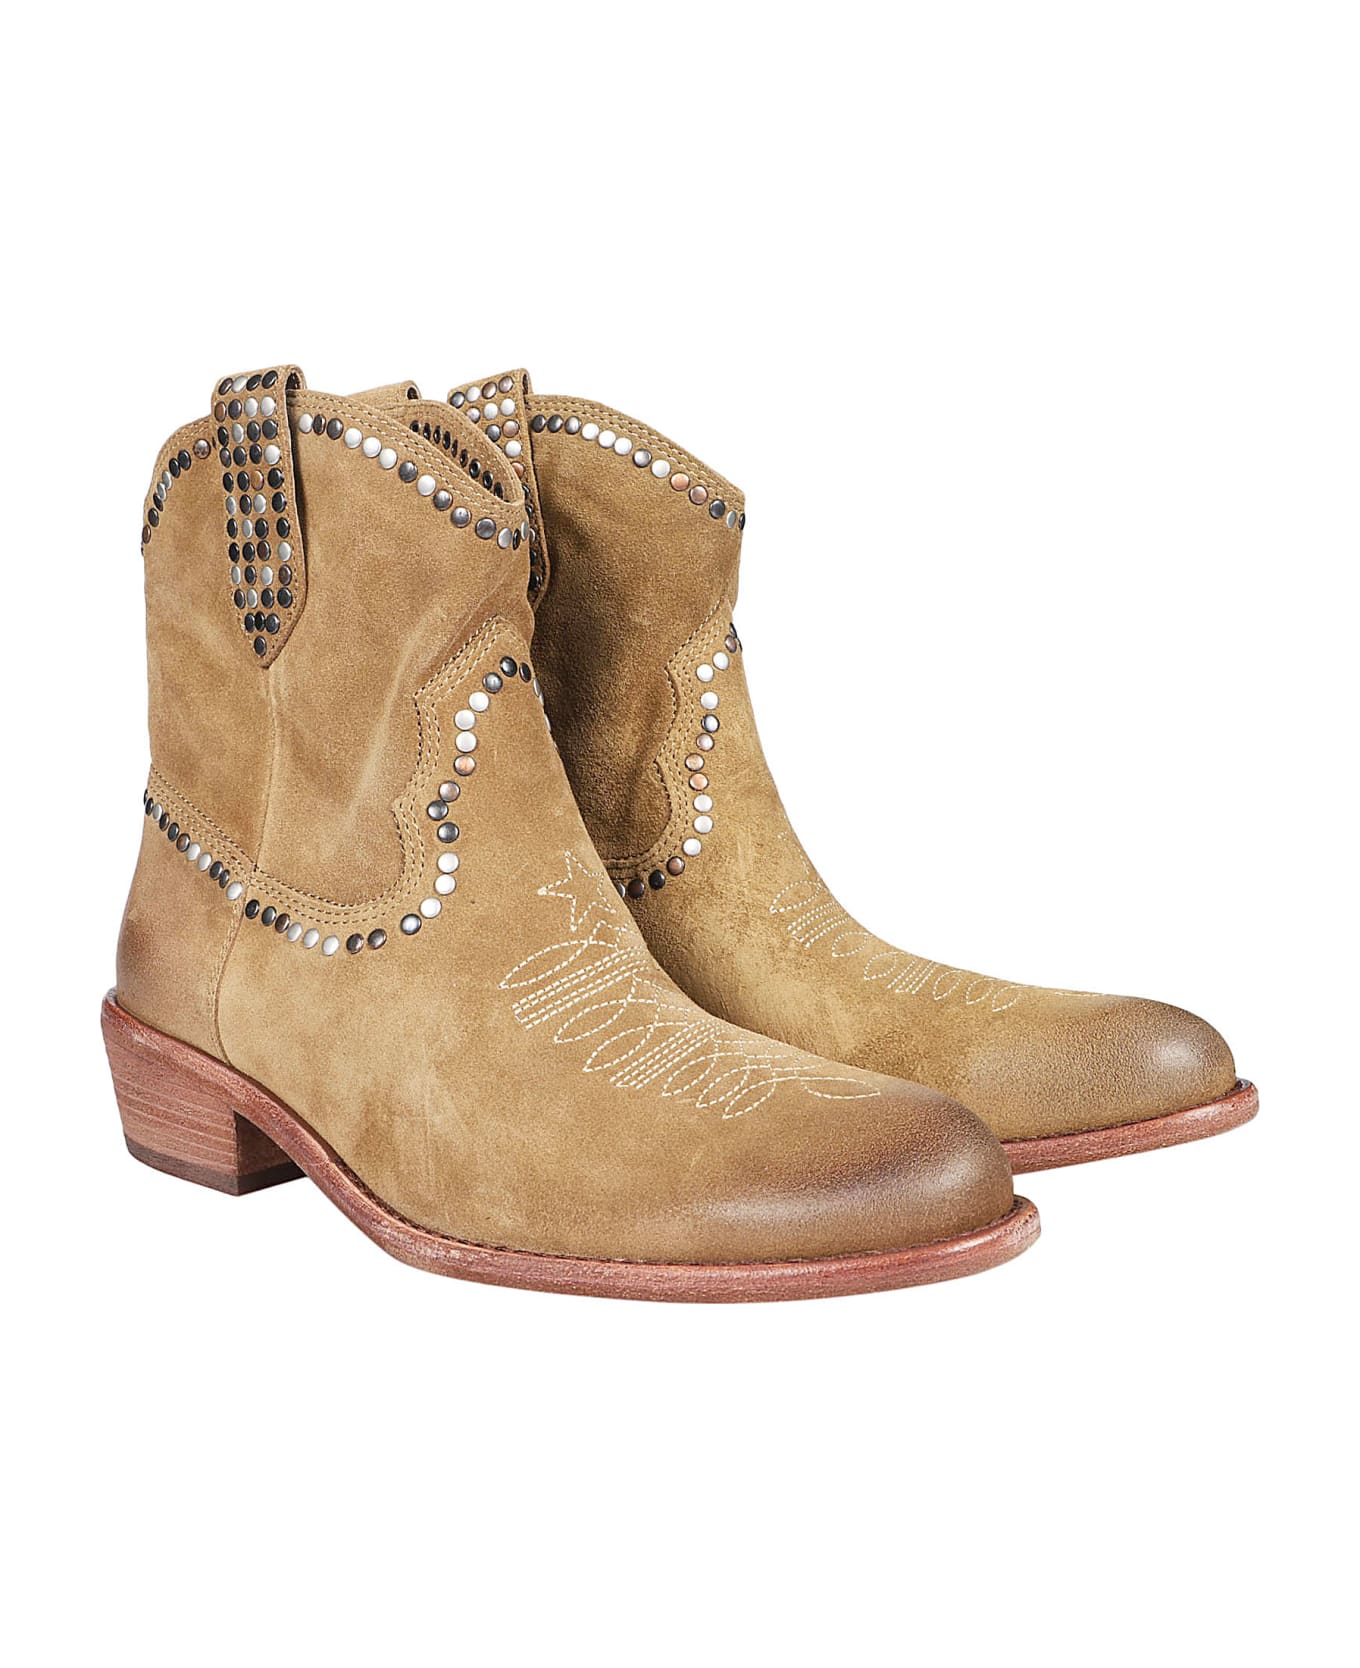 Ash Gipsy Texan Ankle Boots - Antilope